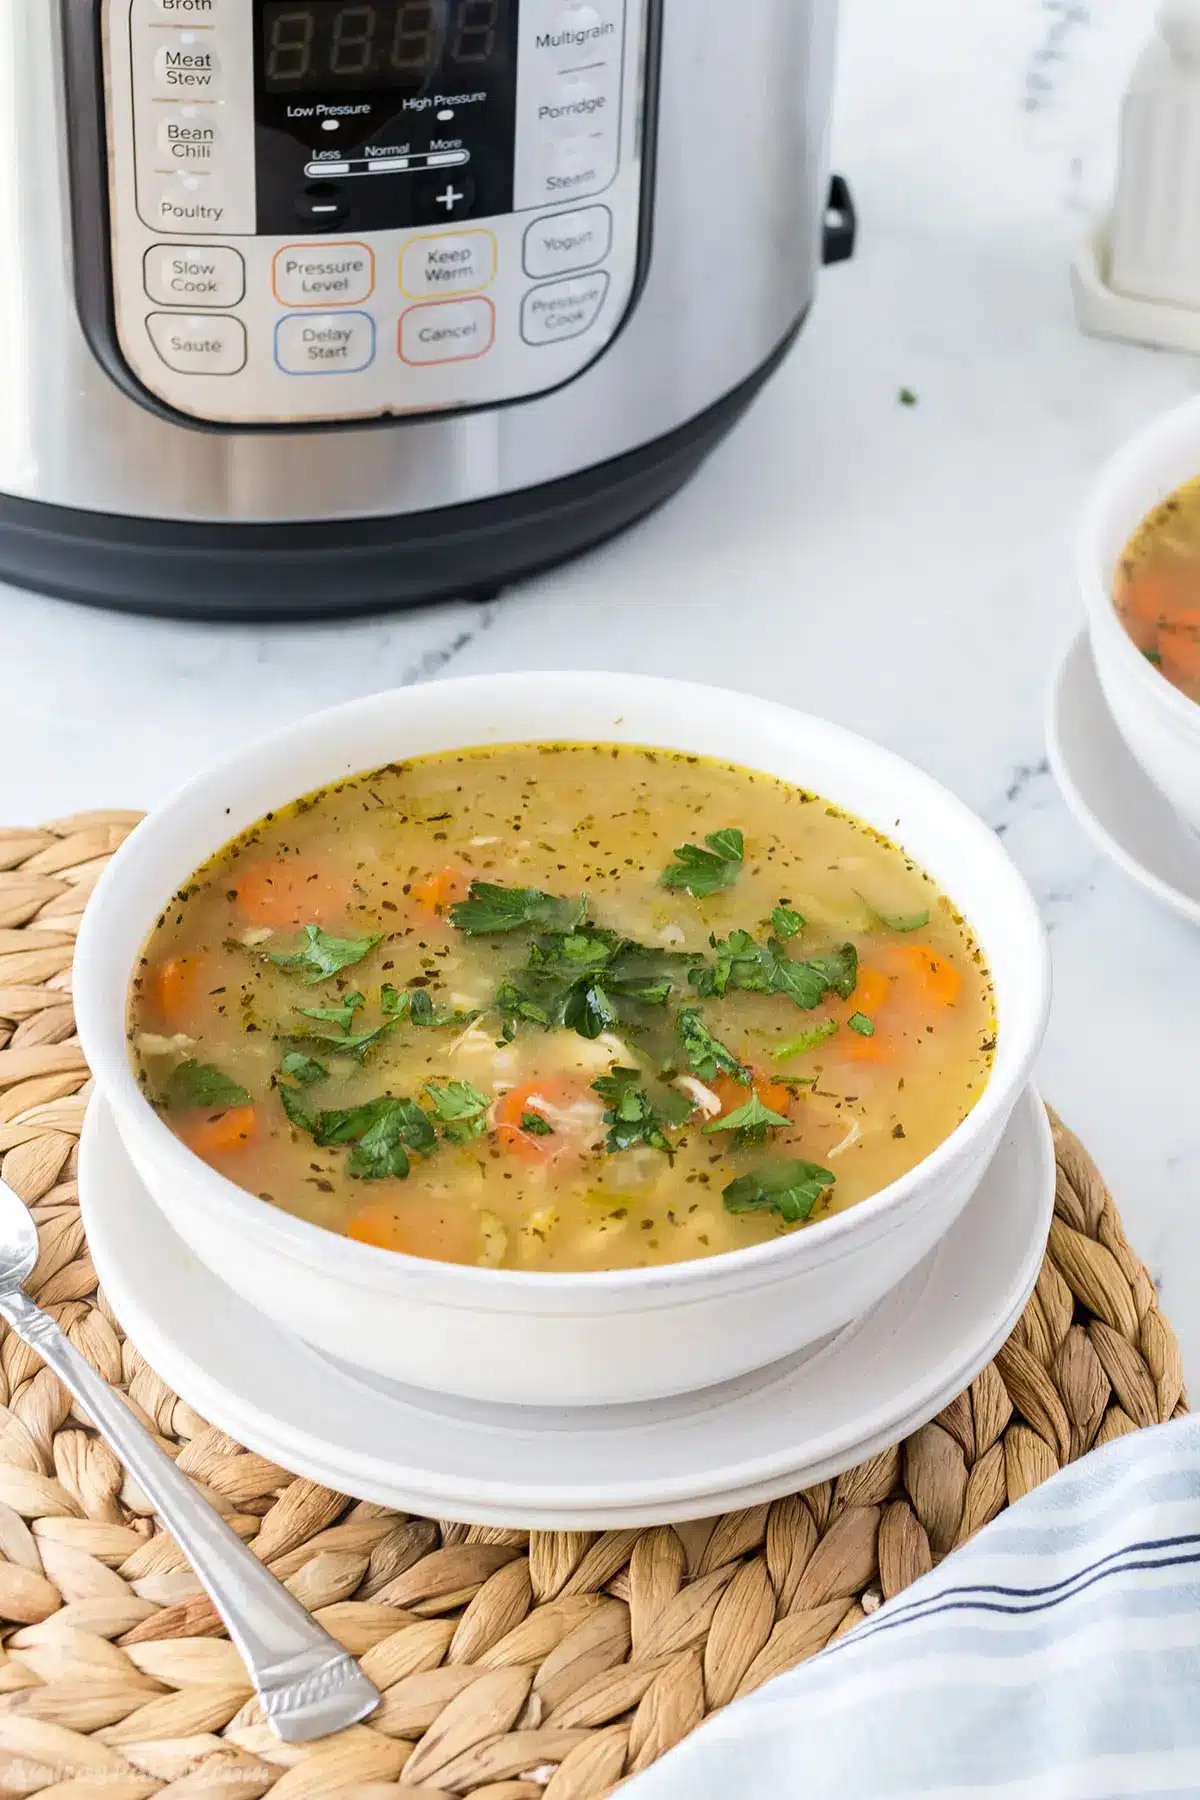 Chicken soup in a soup bowl with an instant pot in the back.